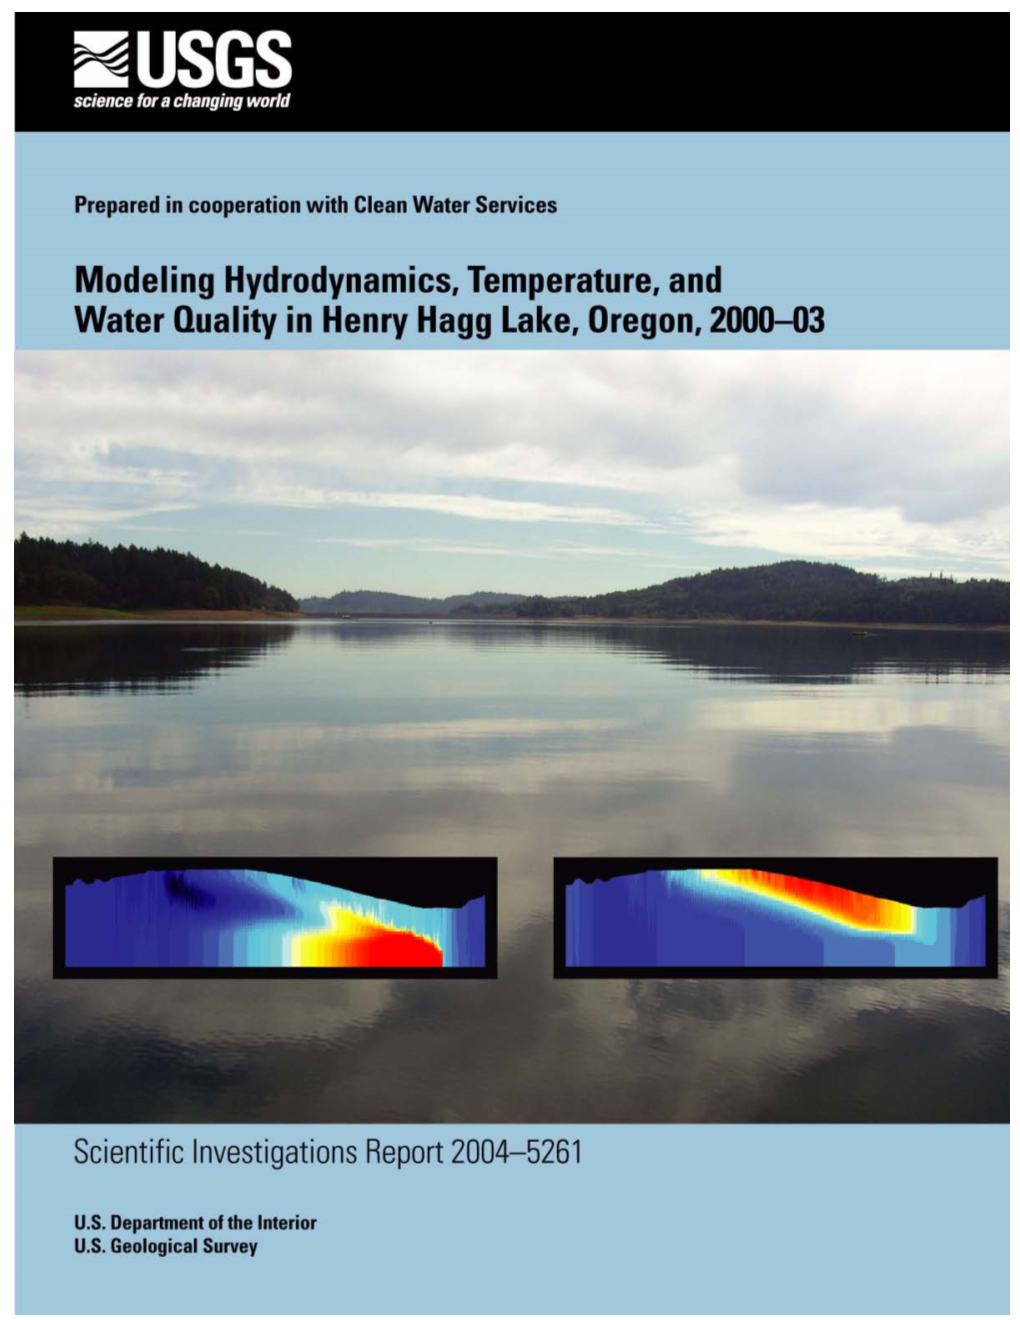 Modeling Hydrodynamics, Temperature, Ands Water Quality In